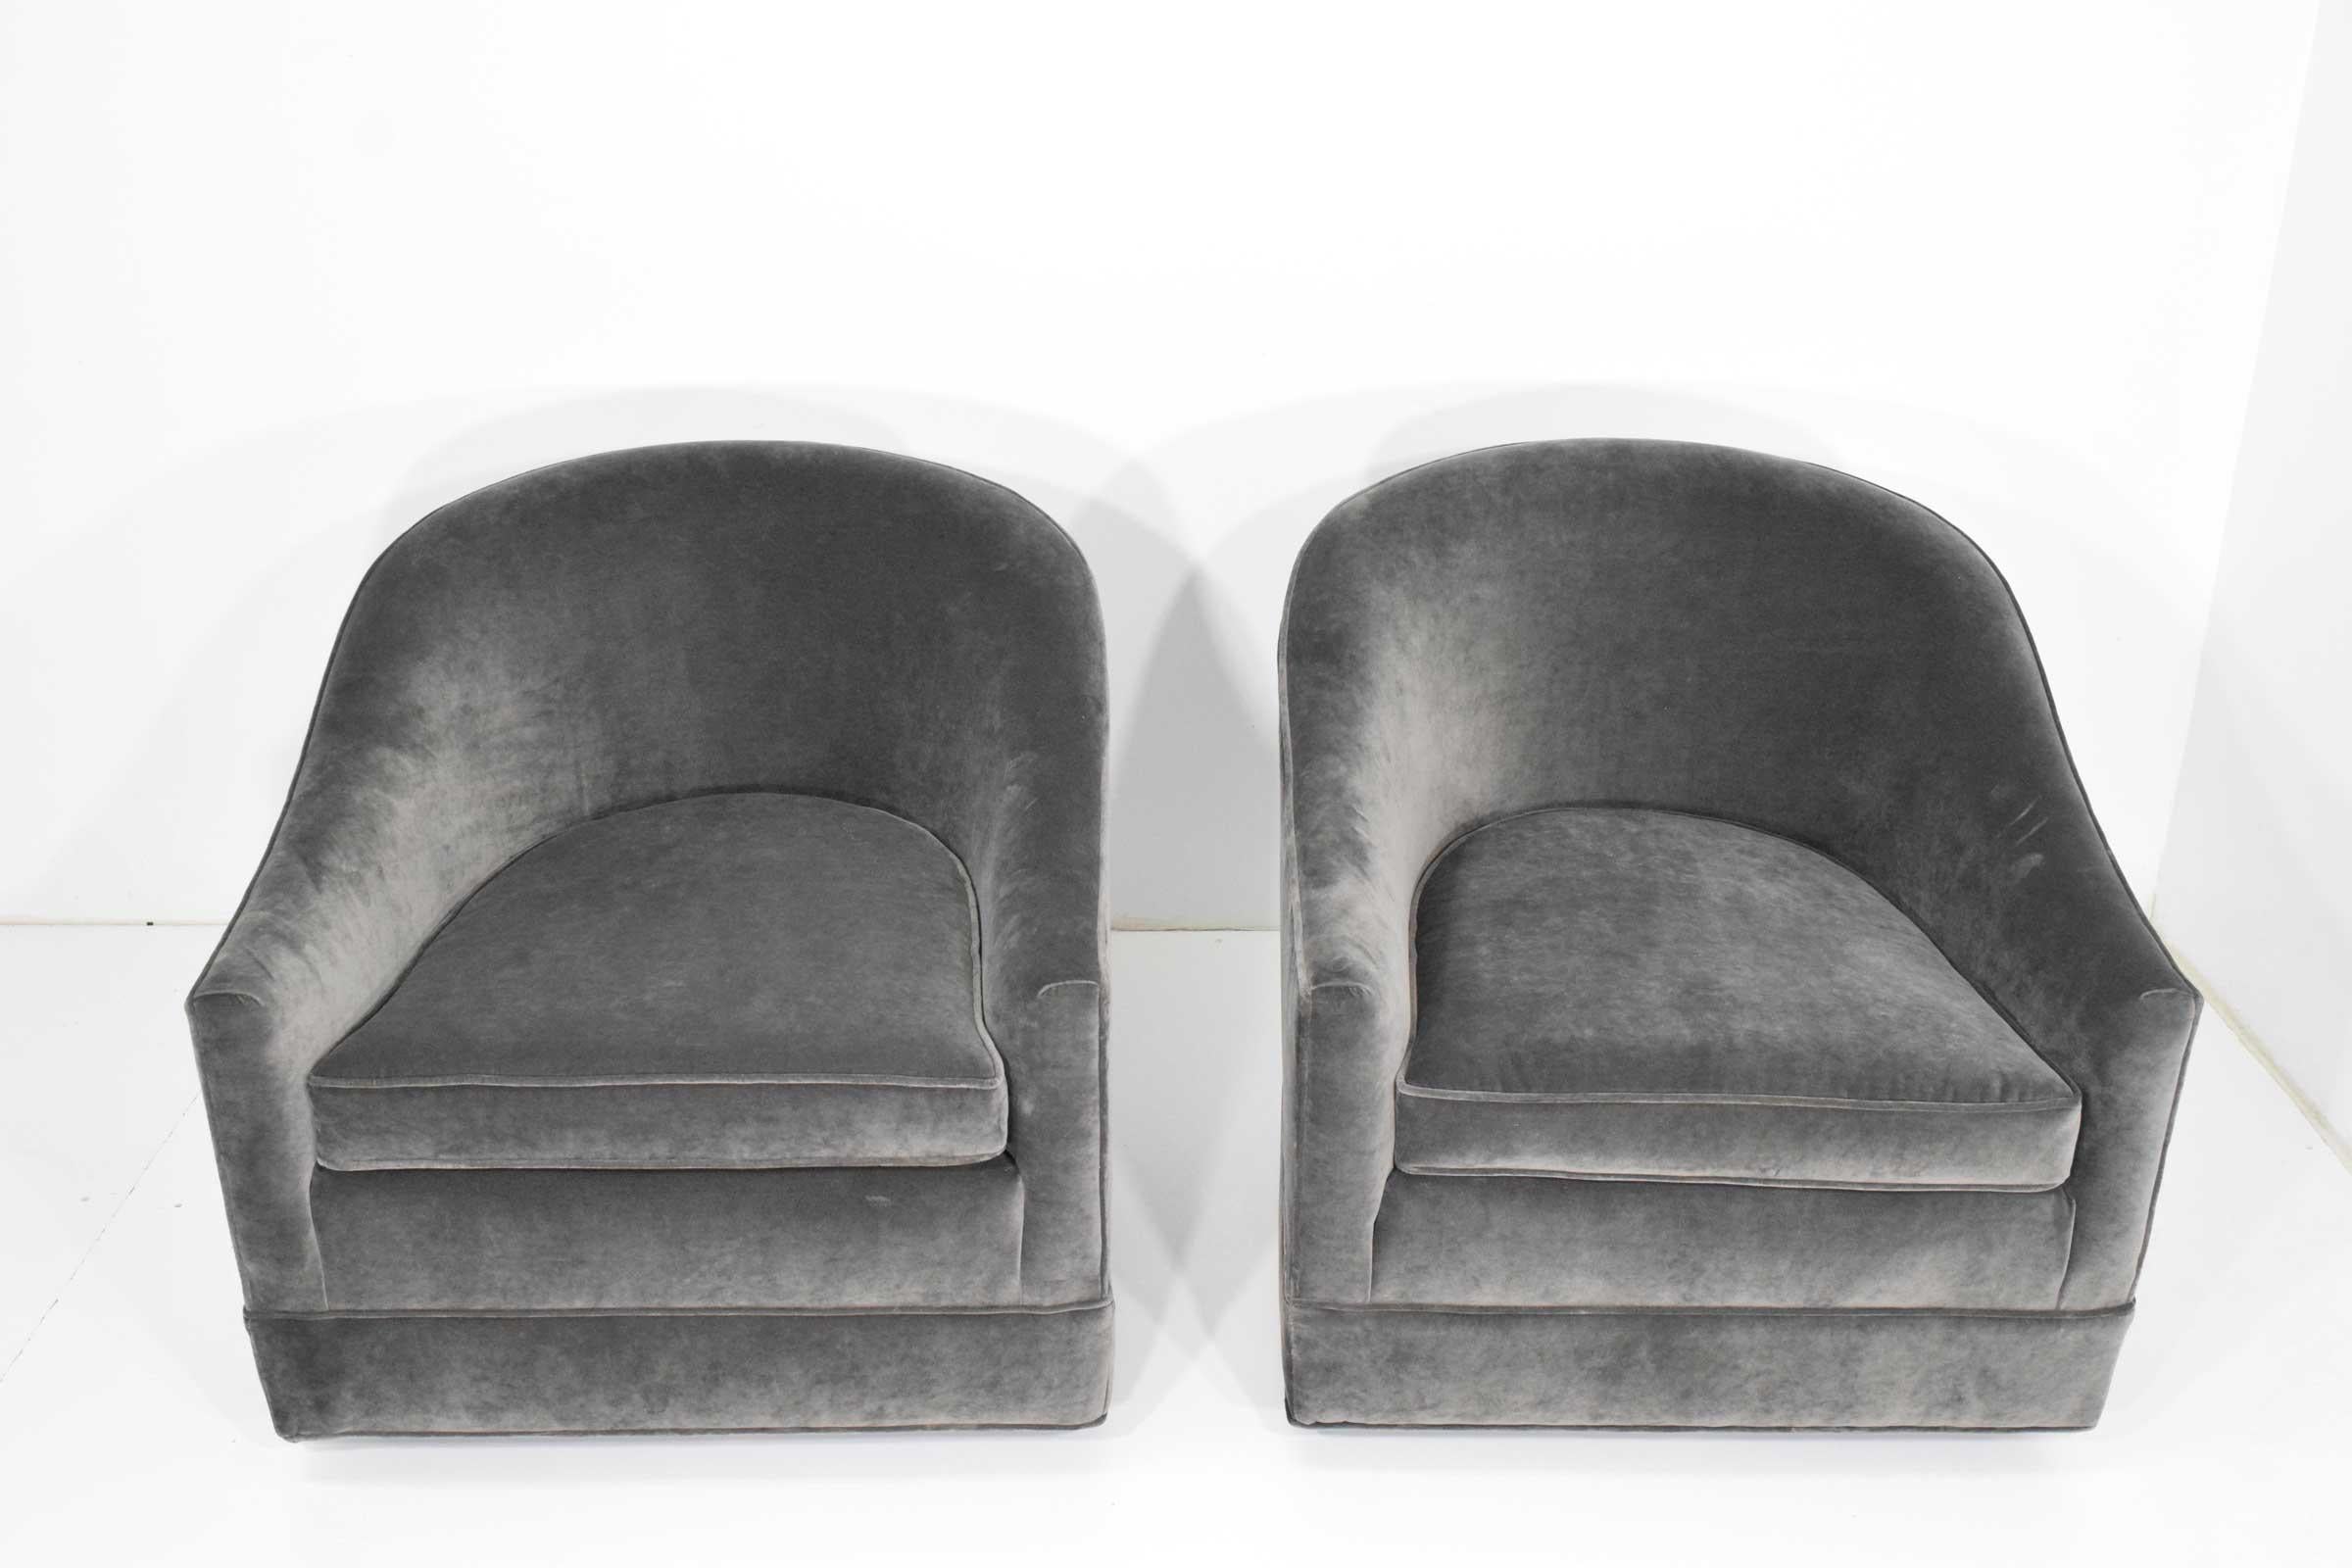 Chairs are upholstered in a gray velvet. They swivel and have a black base. They are super comfortable and a good size.